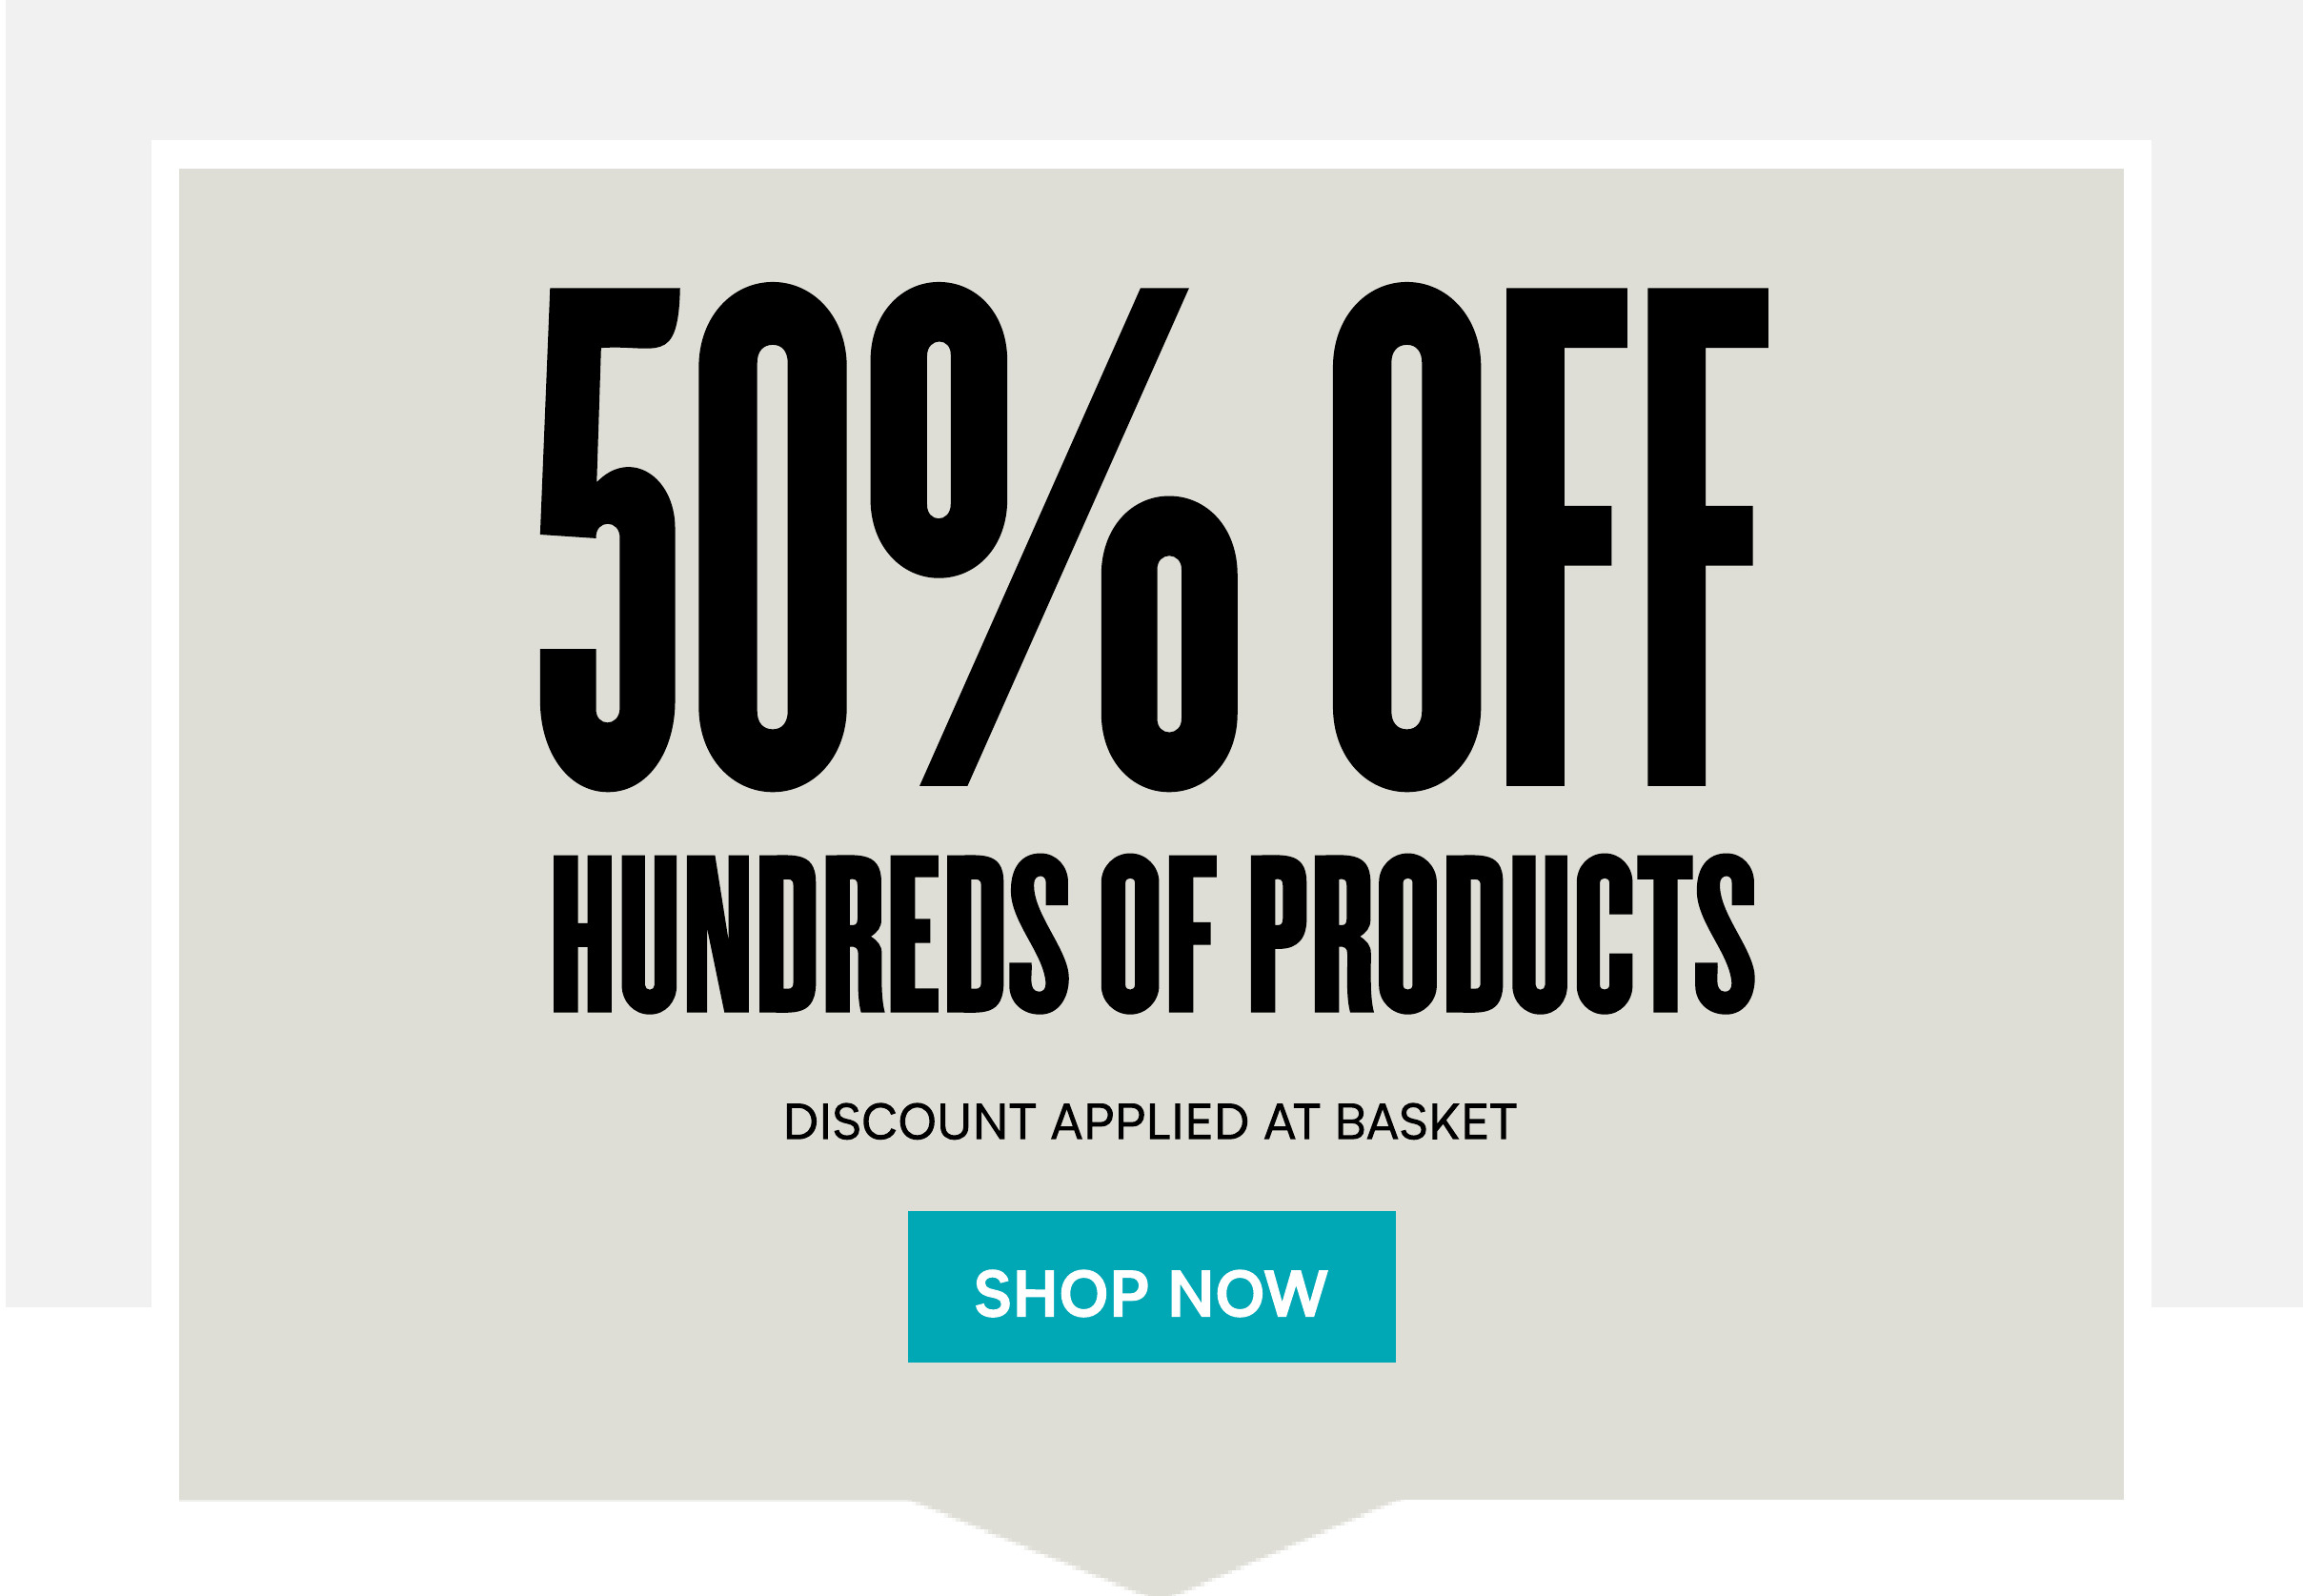 Time to restock with 50% off hundreds of products - Myprotein